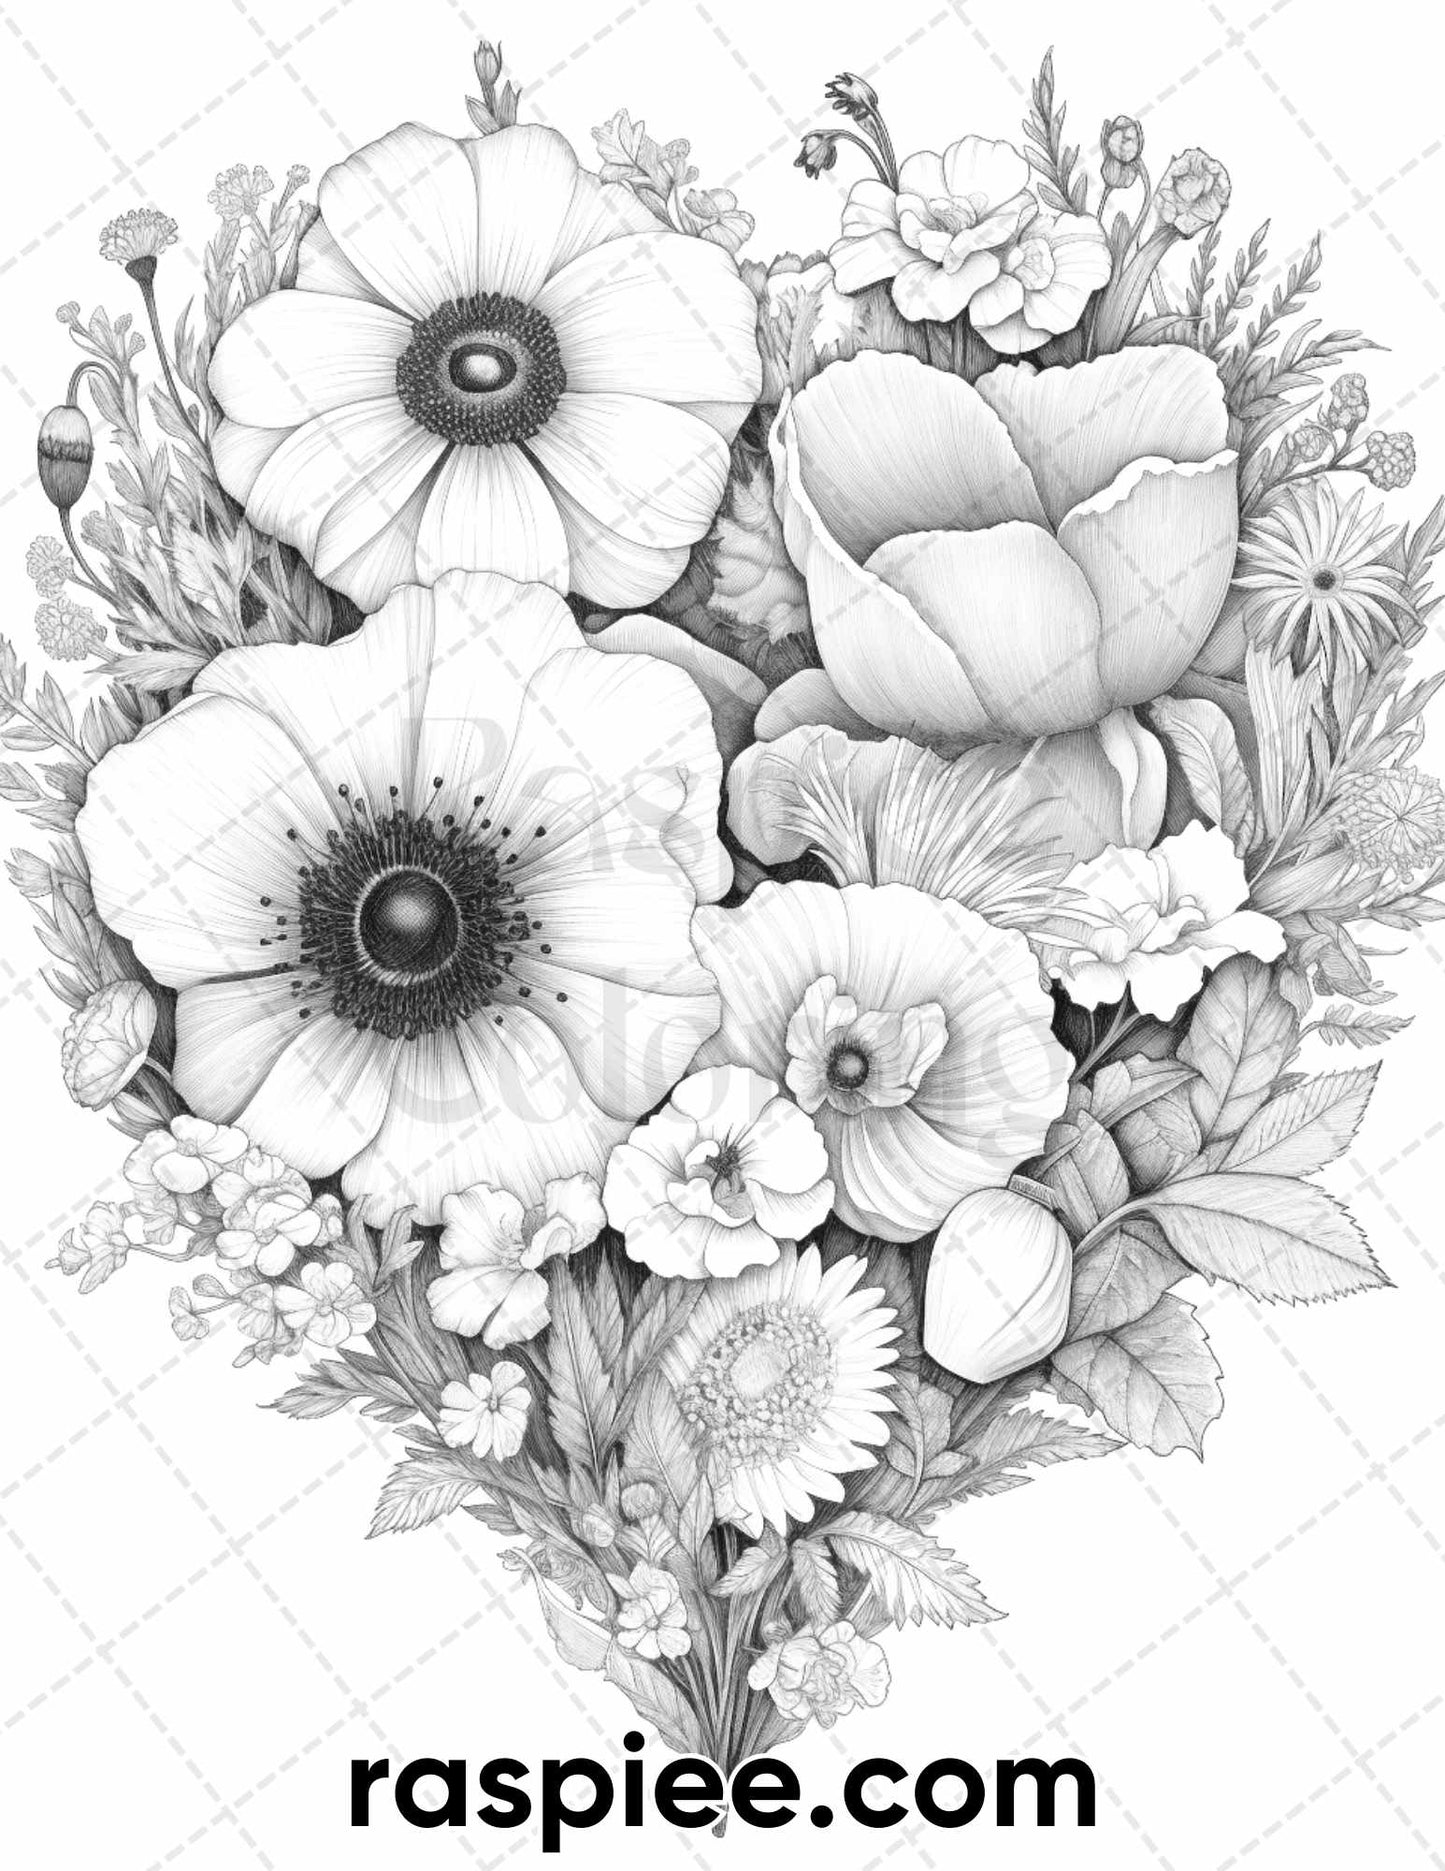 adult coloring pages, adult coloring sheets, adult coloring book pdf, adult coloring book printable, grayscale coloring pages, grayscale coloring books, spring coloring pages for adults, spring coloring book, holiday coloring pages for adults, valentine's day coloring pages, valentine coloring book, flower coloring pages for adults, flower coloring book